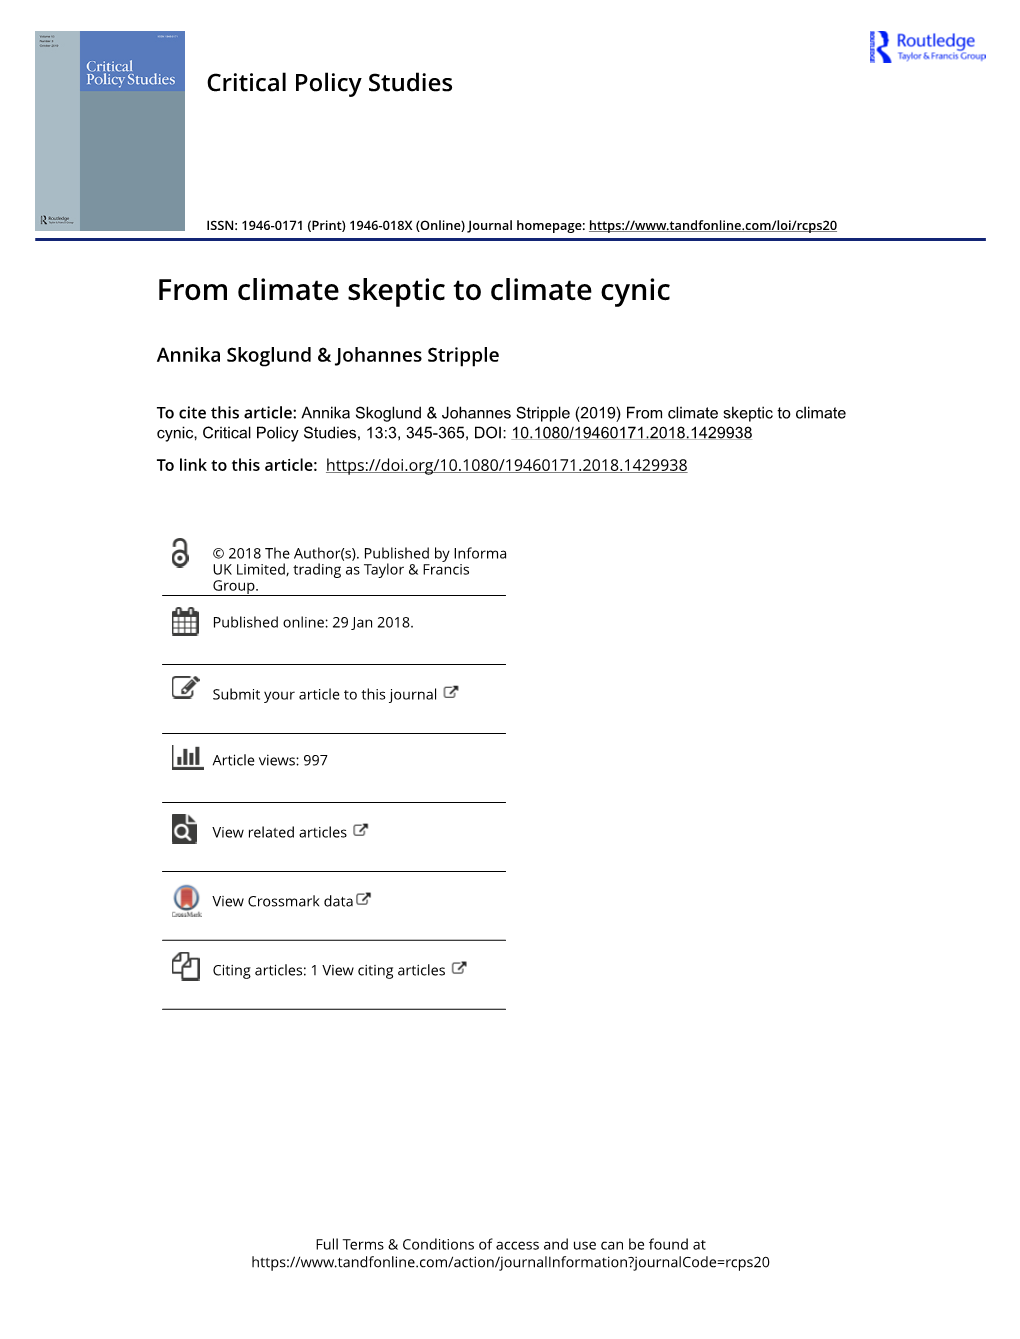 From Climate Skeptic to Climate Cynic